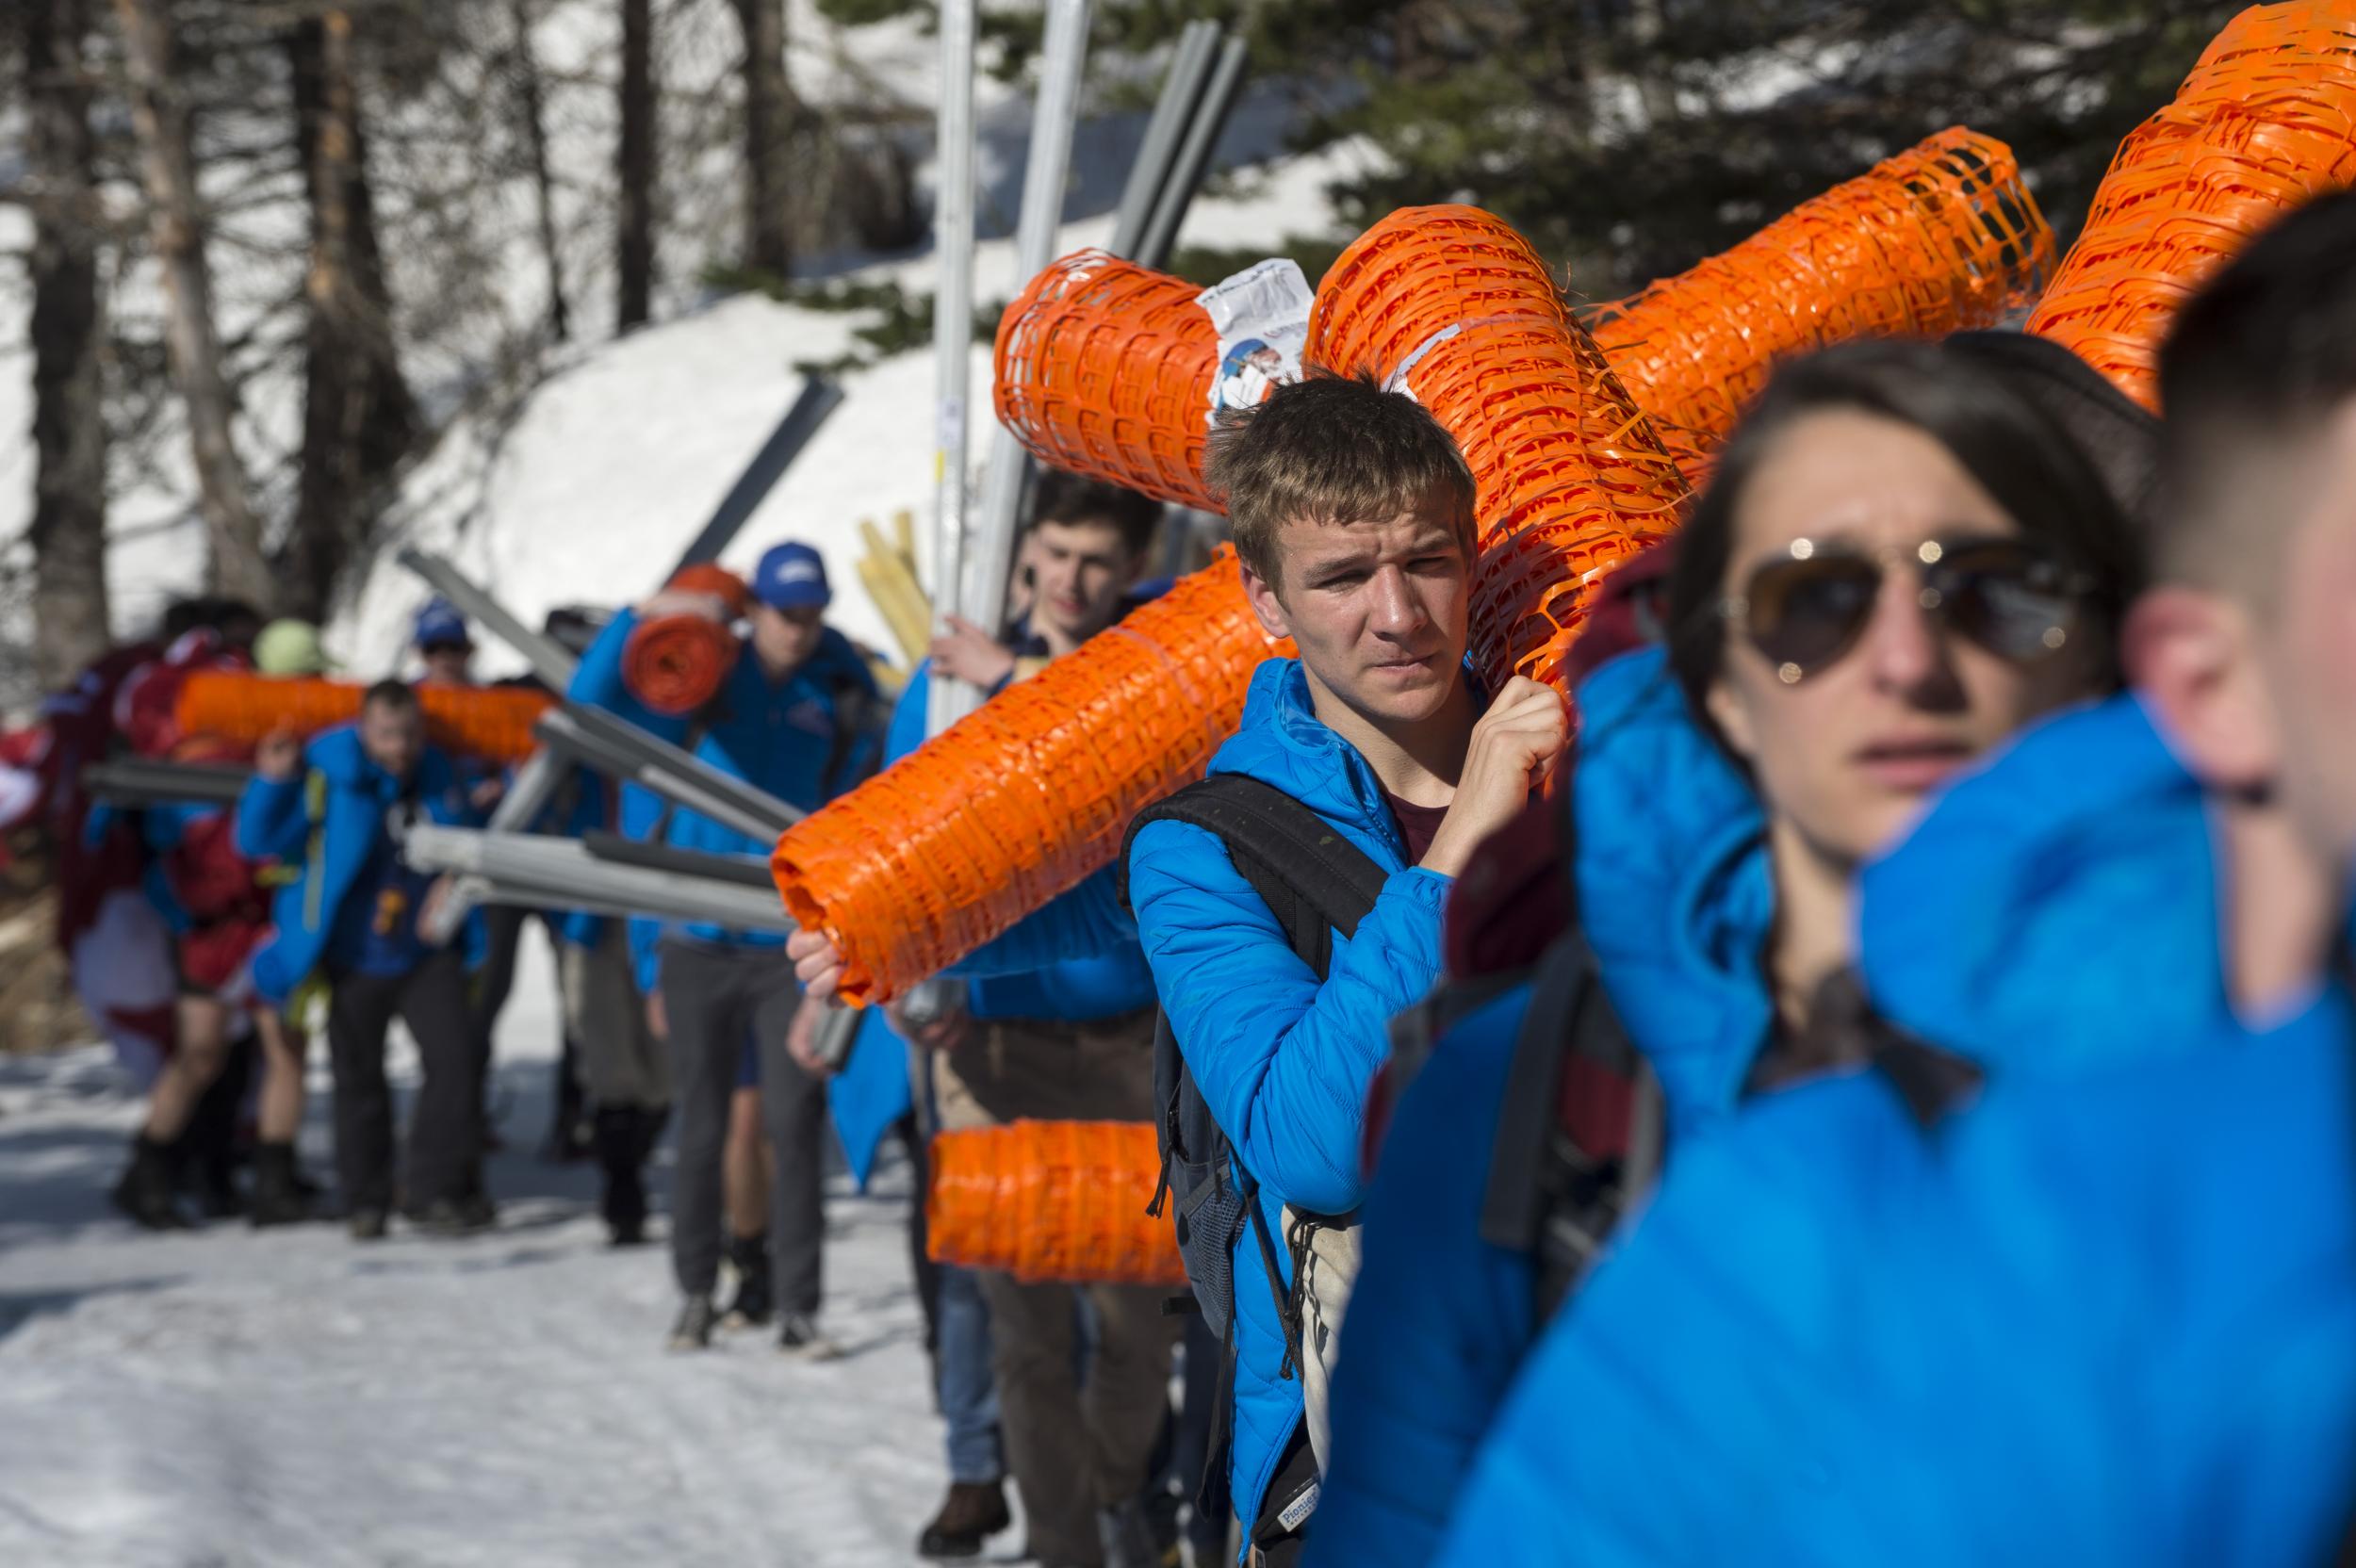 &#13;
Activists carry supplies during the stunt, titled "Mission Alpes" &#13;